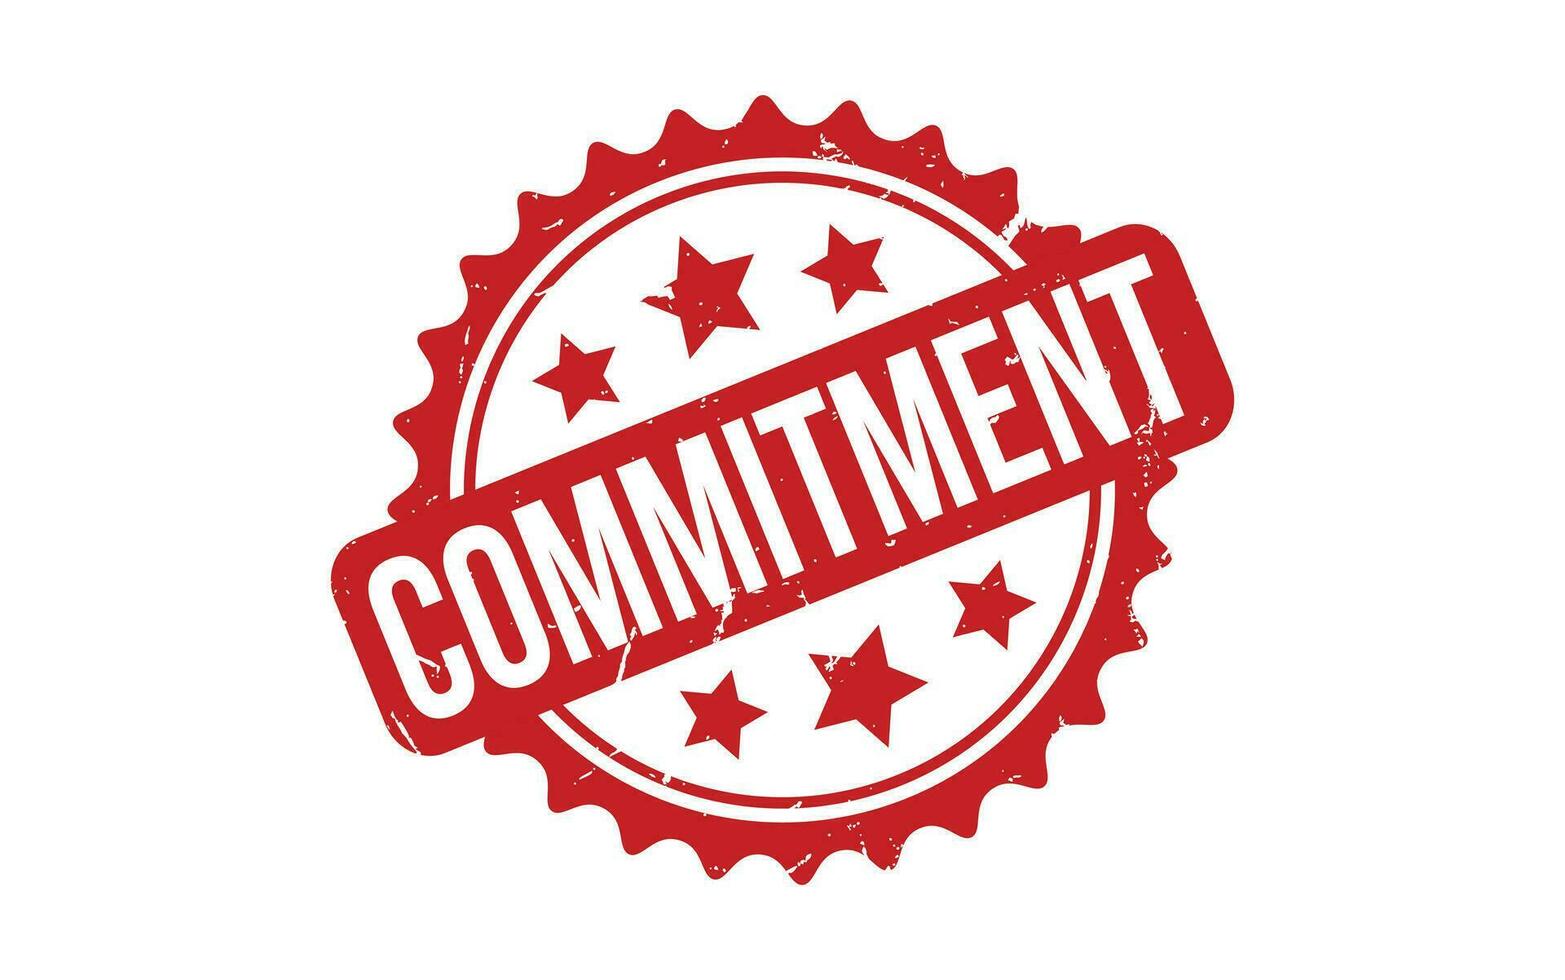 Red Commitment Rubber Stamp Seal Vector